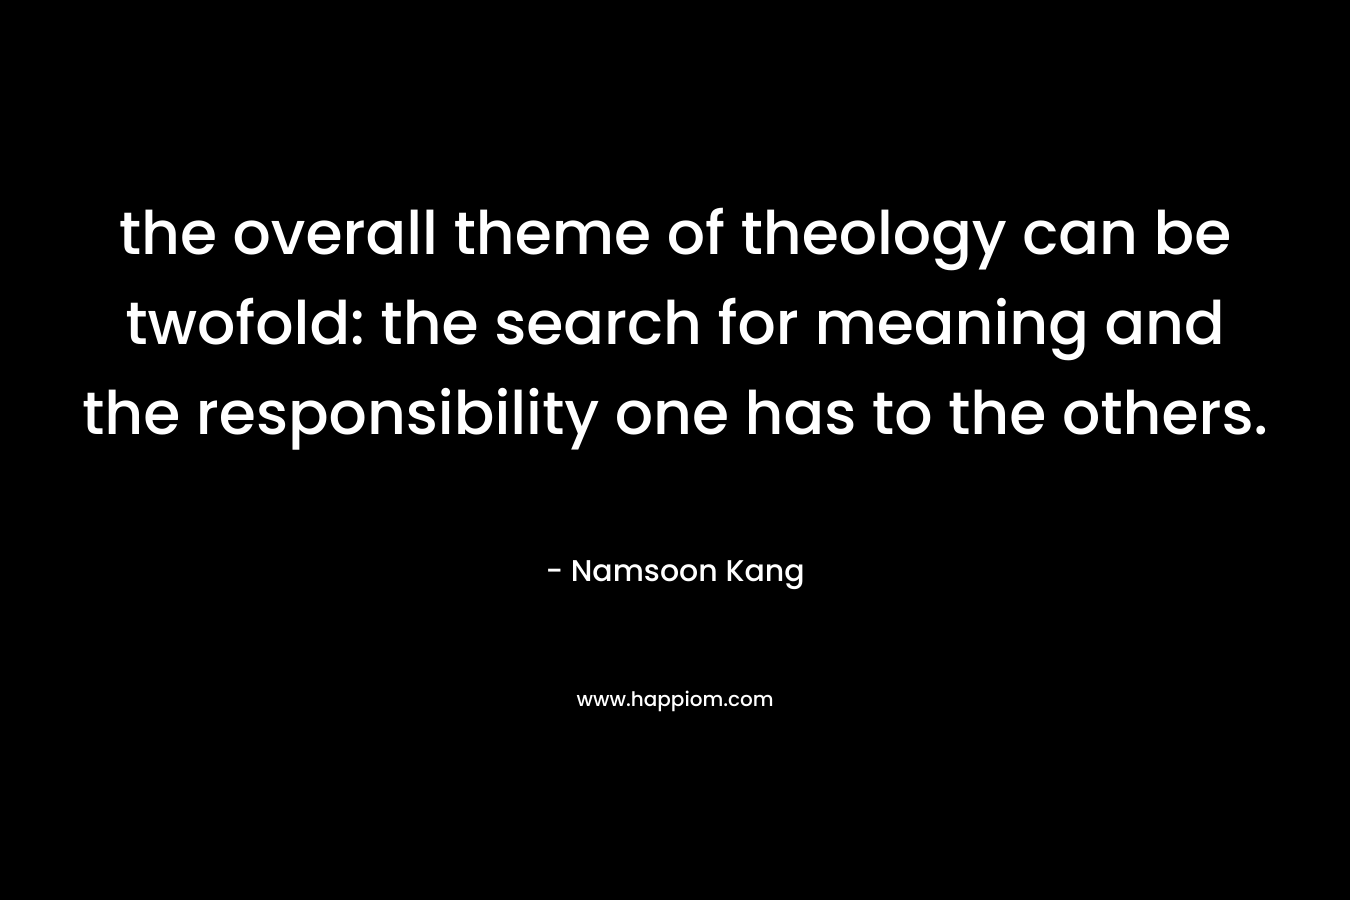 the overall theme of theology can be twofold: the search for meaning and the responsibility one has to the others. – Namsoon Kang